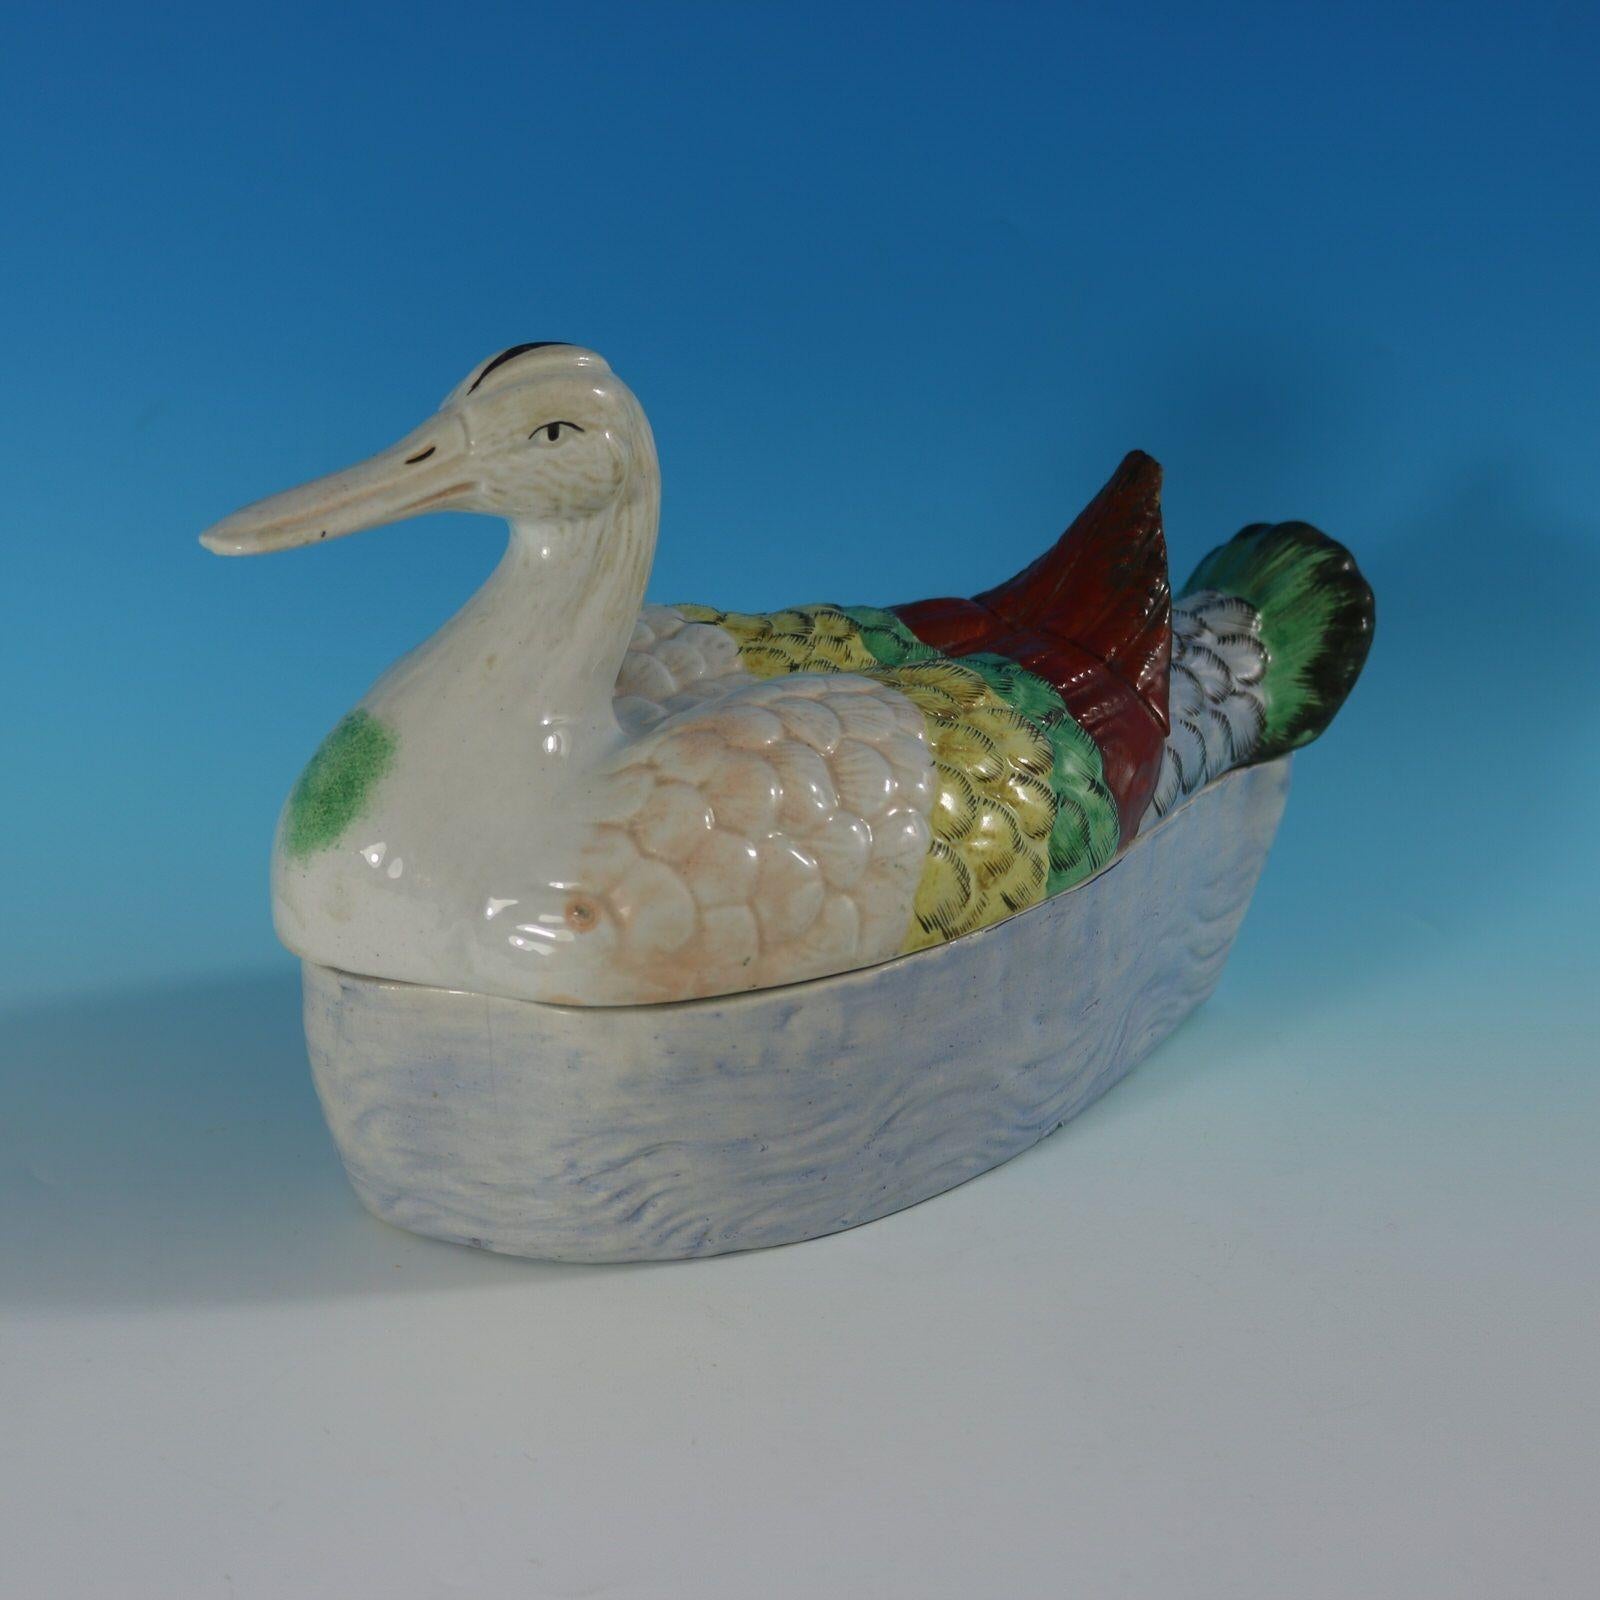 Staffordshire Pottery tureen with cover which features a duck forming the lid, sitting on a base molded with a rippling water effect. Maker's mark, '6' molded into the underside.